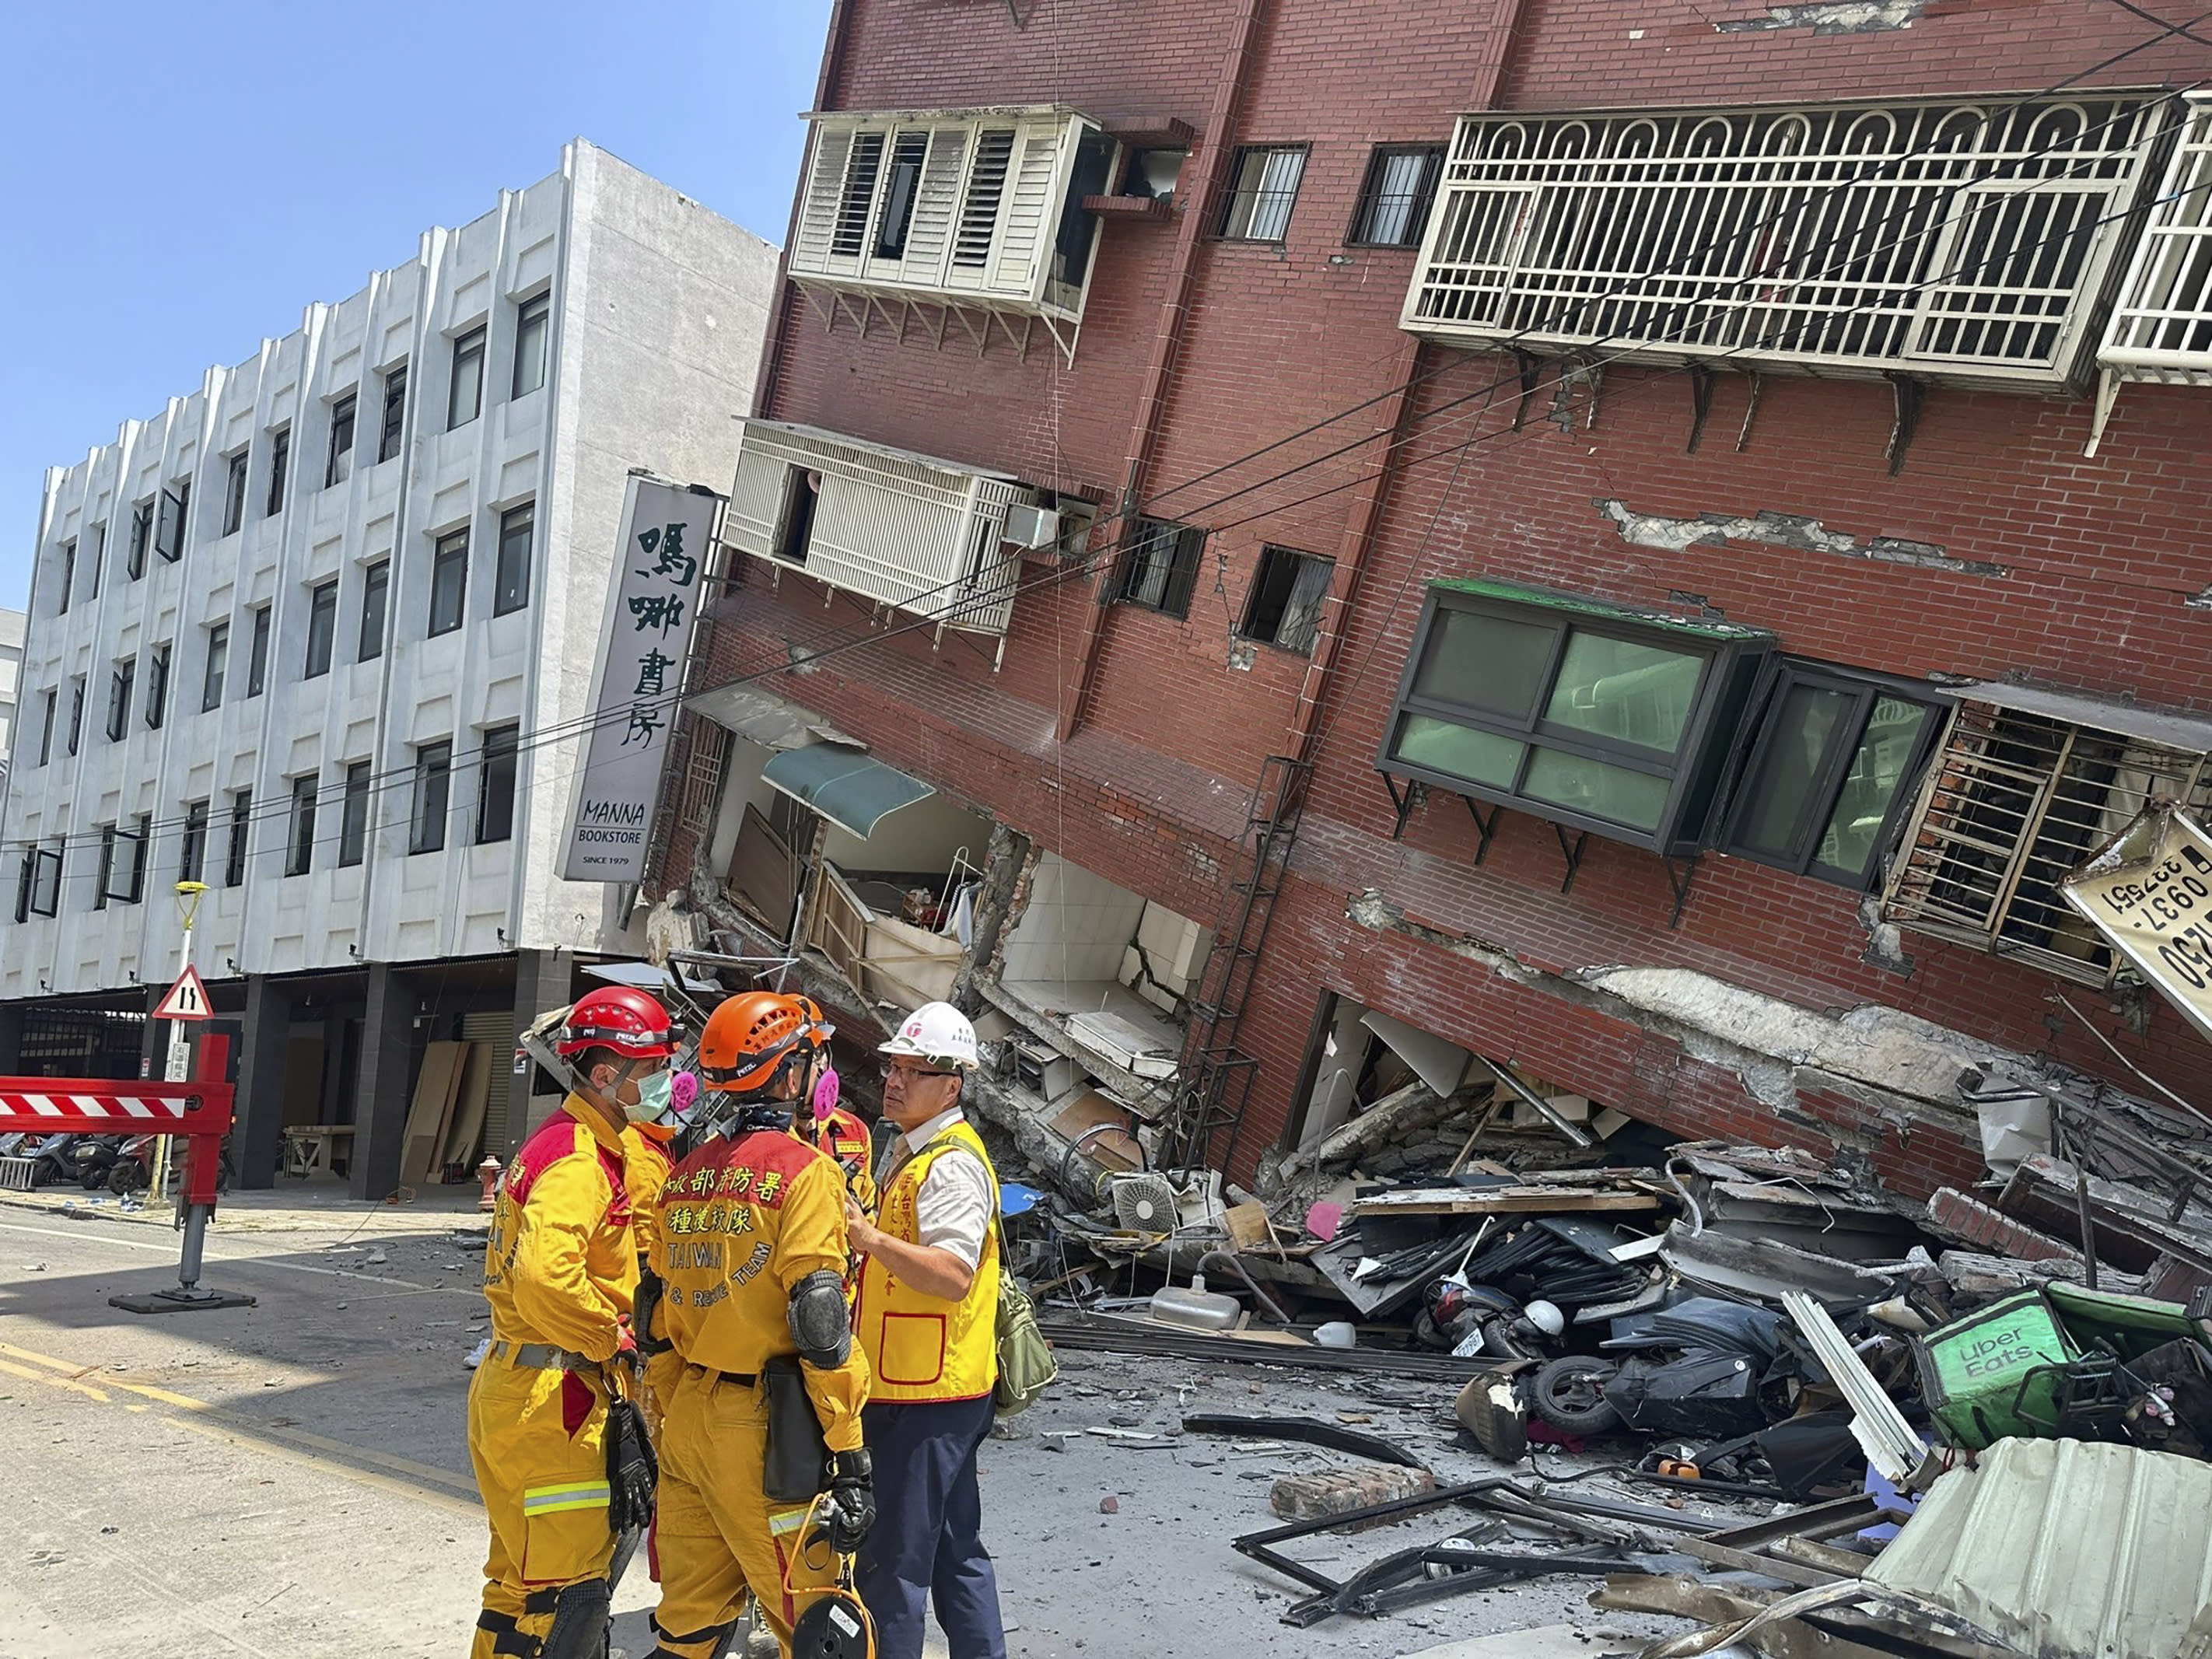 Members of a search and rescue team gather outside a lean-to building in Hualien City.